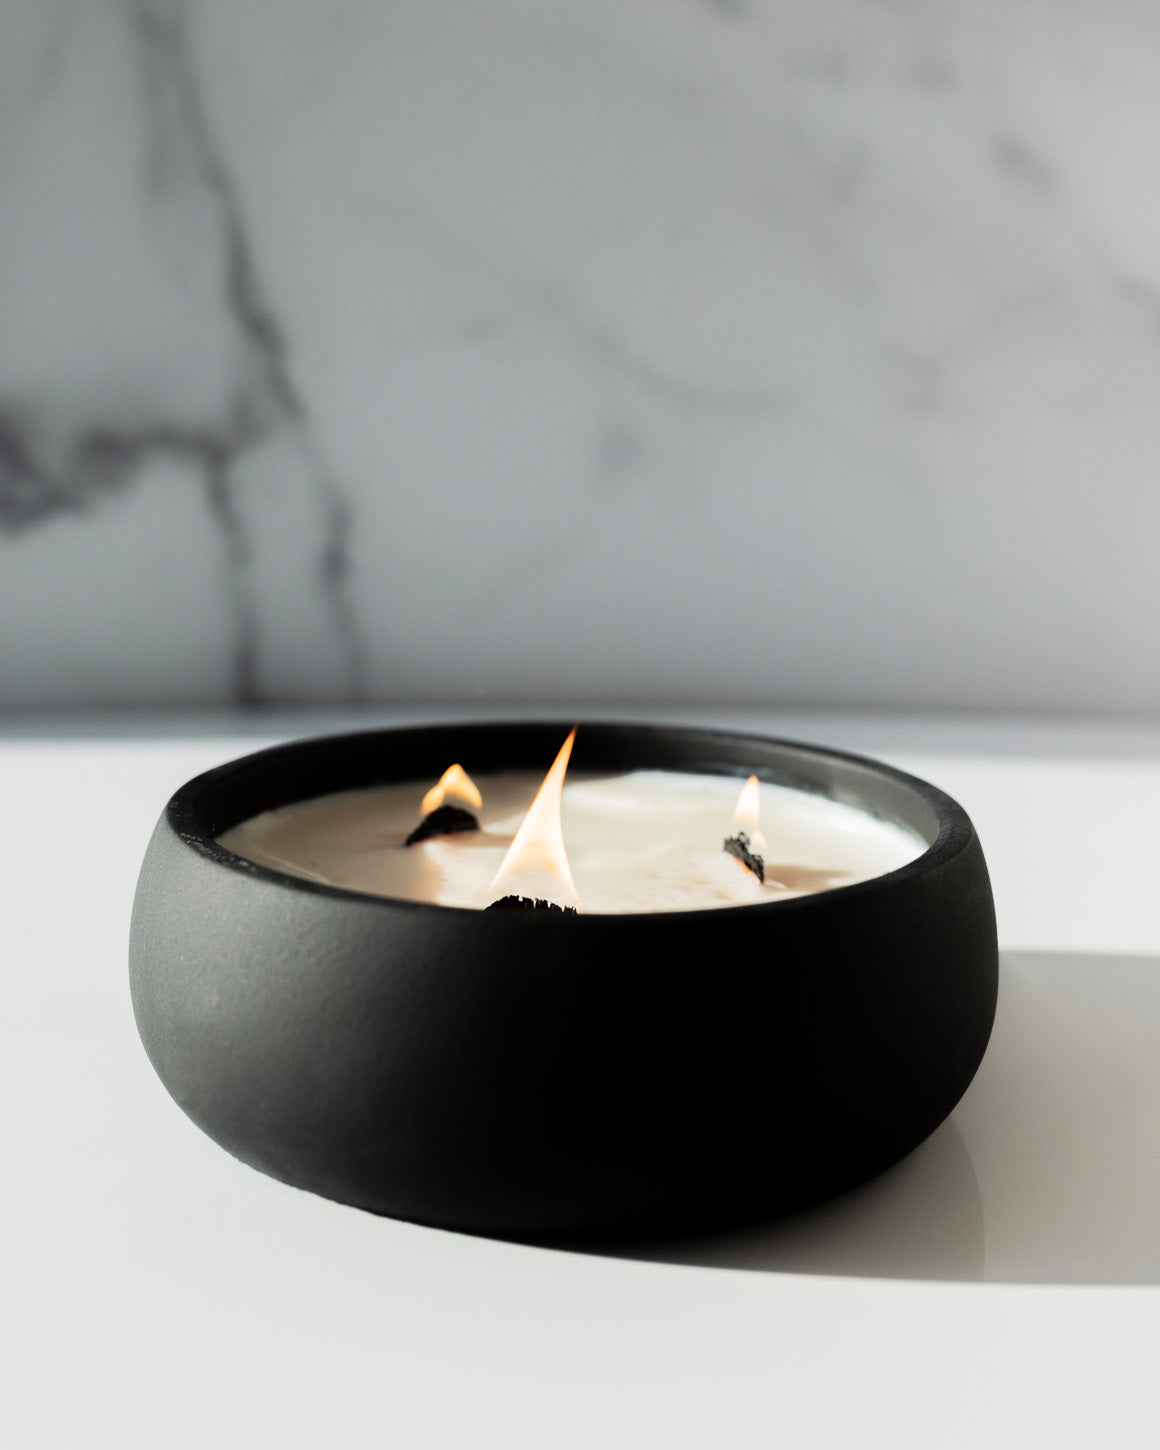 Calm Within the Chaos Coconut Soy Candle - Black Concrete Wooden Wick Vessel